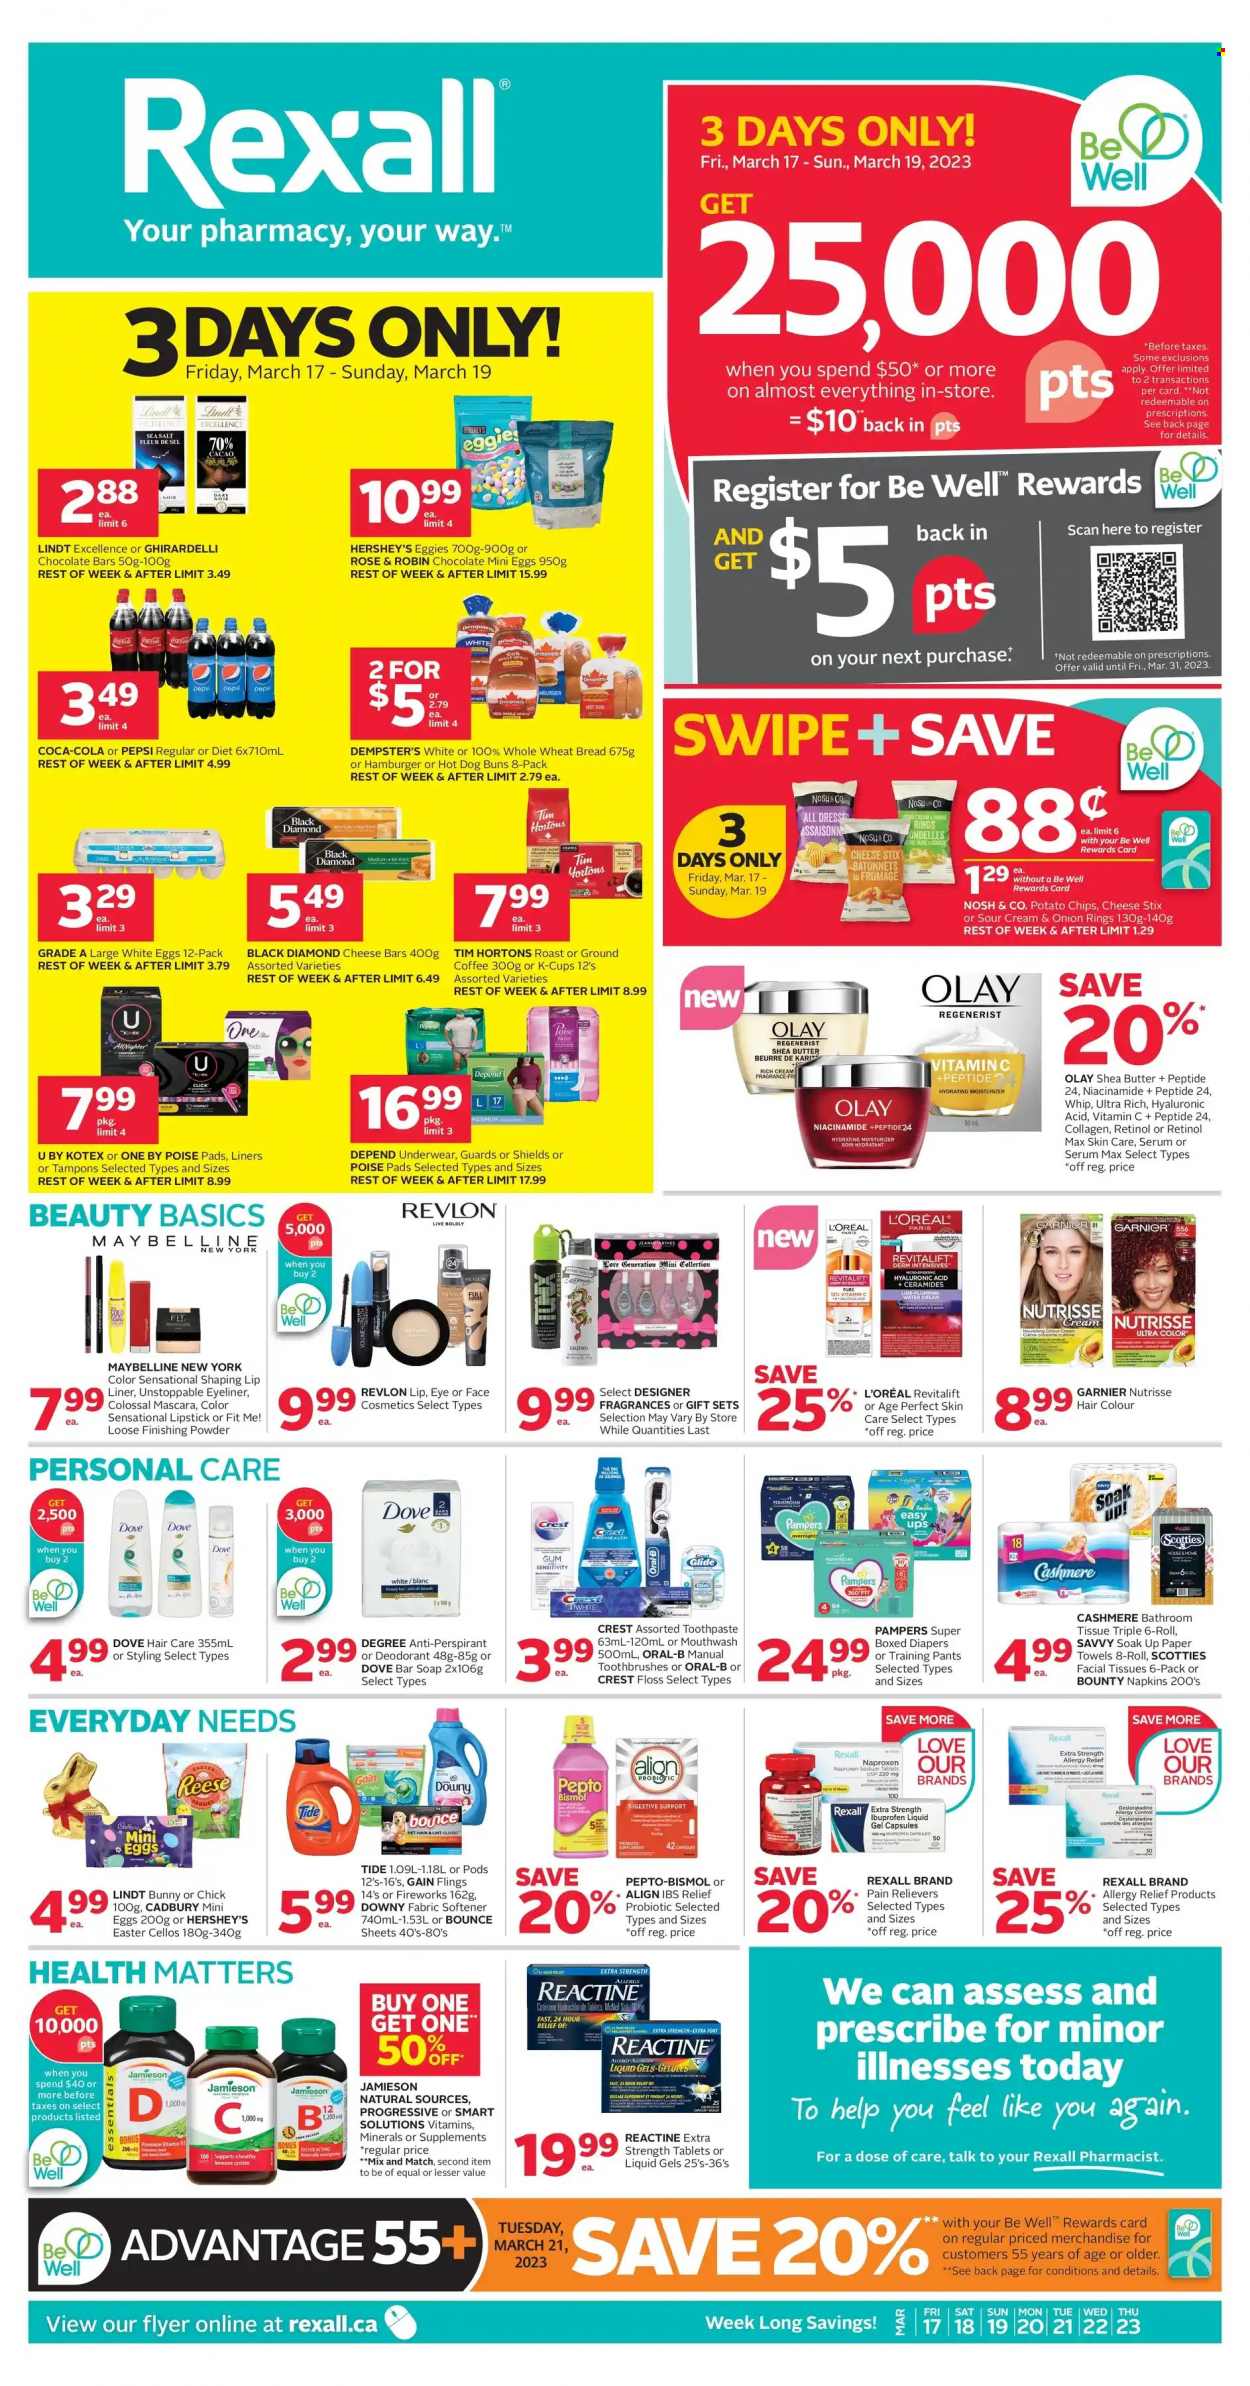 thumbnail - Rexall Flyer - March 17, 2023 - March 23, 2023 - Sales products - wheat bread, buns, onion rings, Dove, Bounty, Mars, Hershey's, Cadbury, Ghirardelli, chocolate bar, potato chips, chips, Coca-Cola, Pepsi, water, coffee, ground coffee, coffee capsules, K-Cups, rosé wine, Pampers, pants, nappies, napkins, baby pants, bath tissue, kitchen towels, paper towels, Gain, Tide, fabric softener, Bounce, Downy Laundry, soap bar, soap, toothpaste, mouthwash, Crest, Kotex, tampons, facial tissues, L’Oréal, moisturizer, serum, Olay, Niacinamide, Revlon, hair color, shea butter, anti-perspirant, fragrance, Jeanne Arthes, lipstick, mascara, Maybelline, eyeliner, face powder, finishing powder, pendant, vitamin c, Ibuprofen, Pepto-bismol, allergy relief, Garnier, Oral-B, Lindt, deodorant. Page 1.